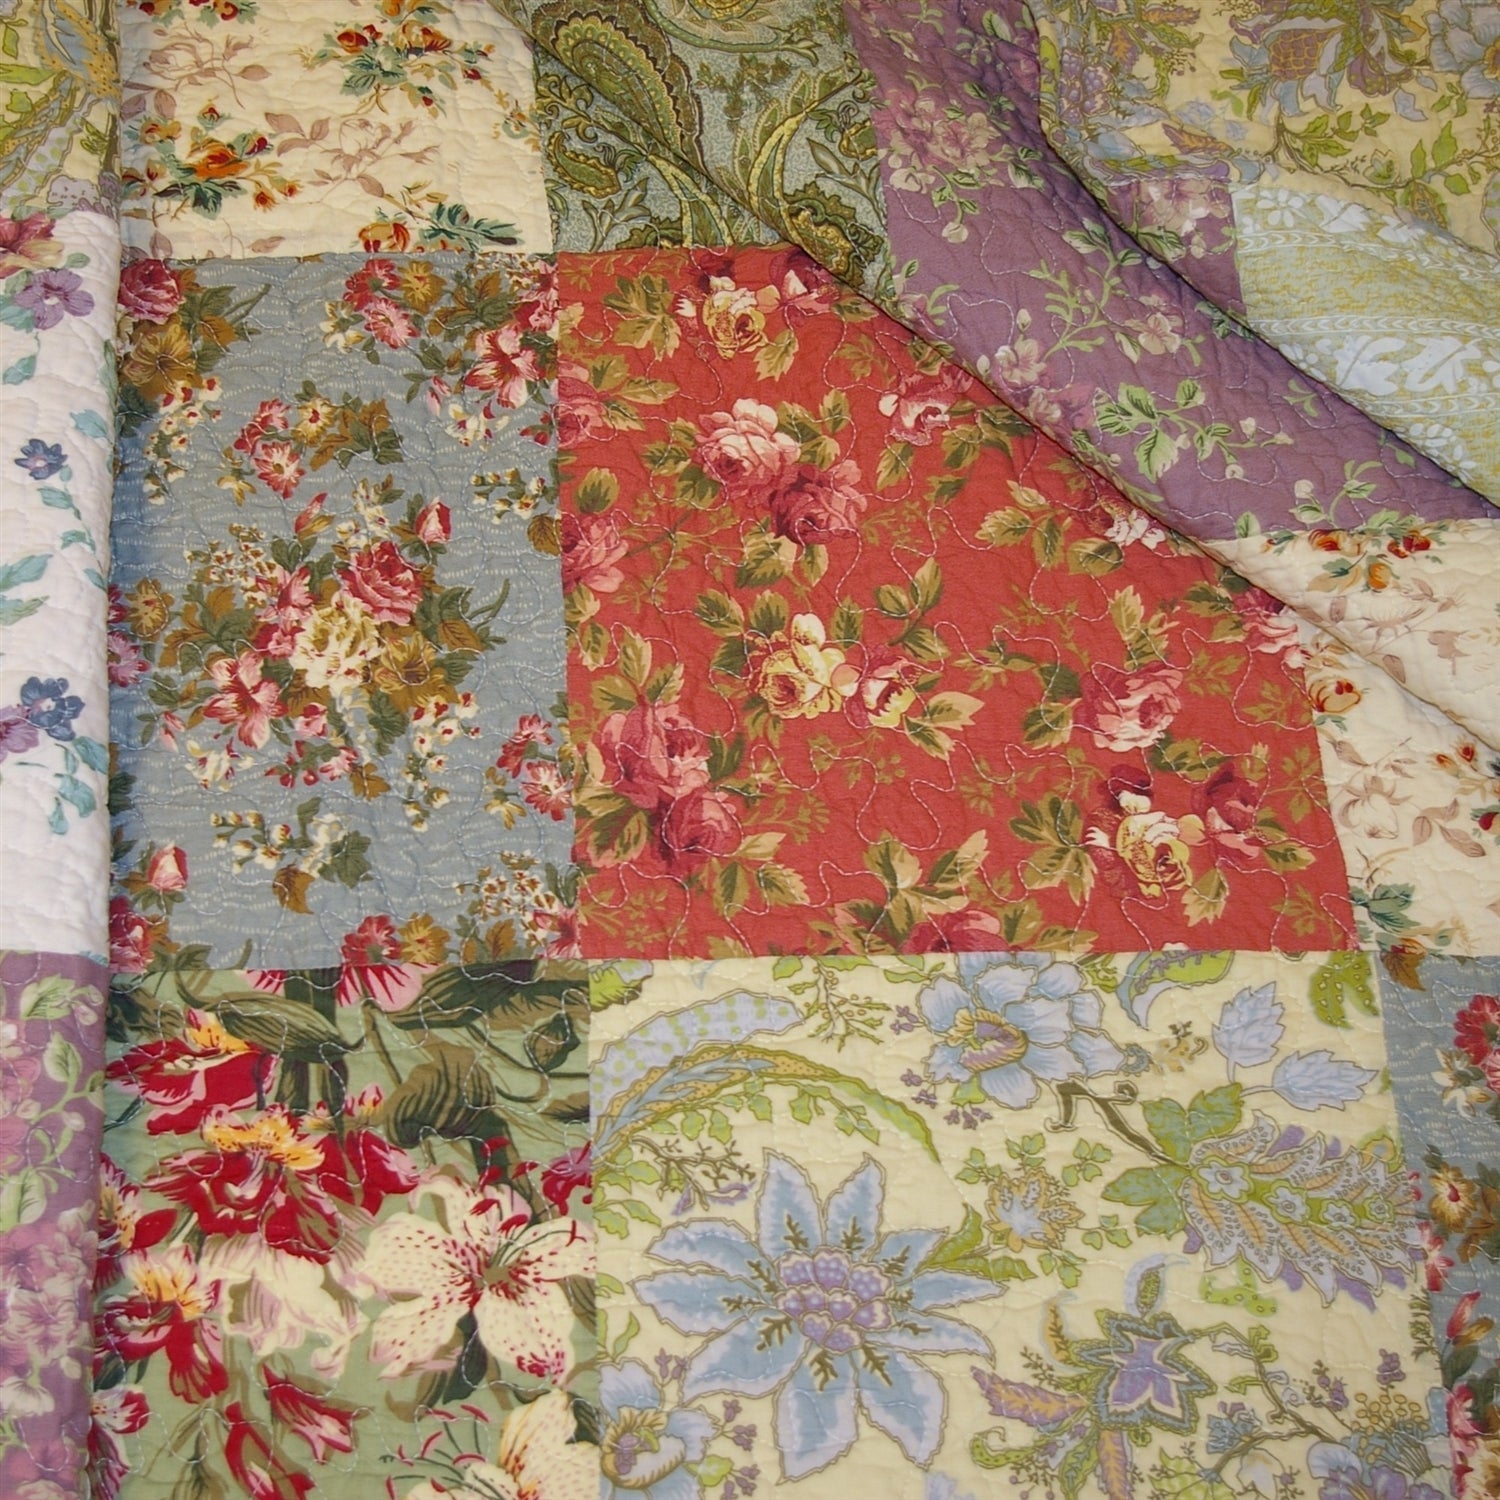 Bedroom > Quilts & Blankets - Full / Queen Size 100% Cotton Floral Paisley Reversible Quilt Set